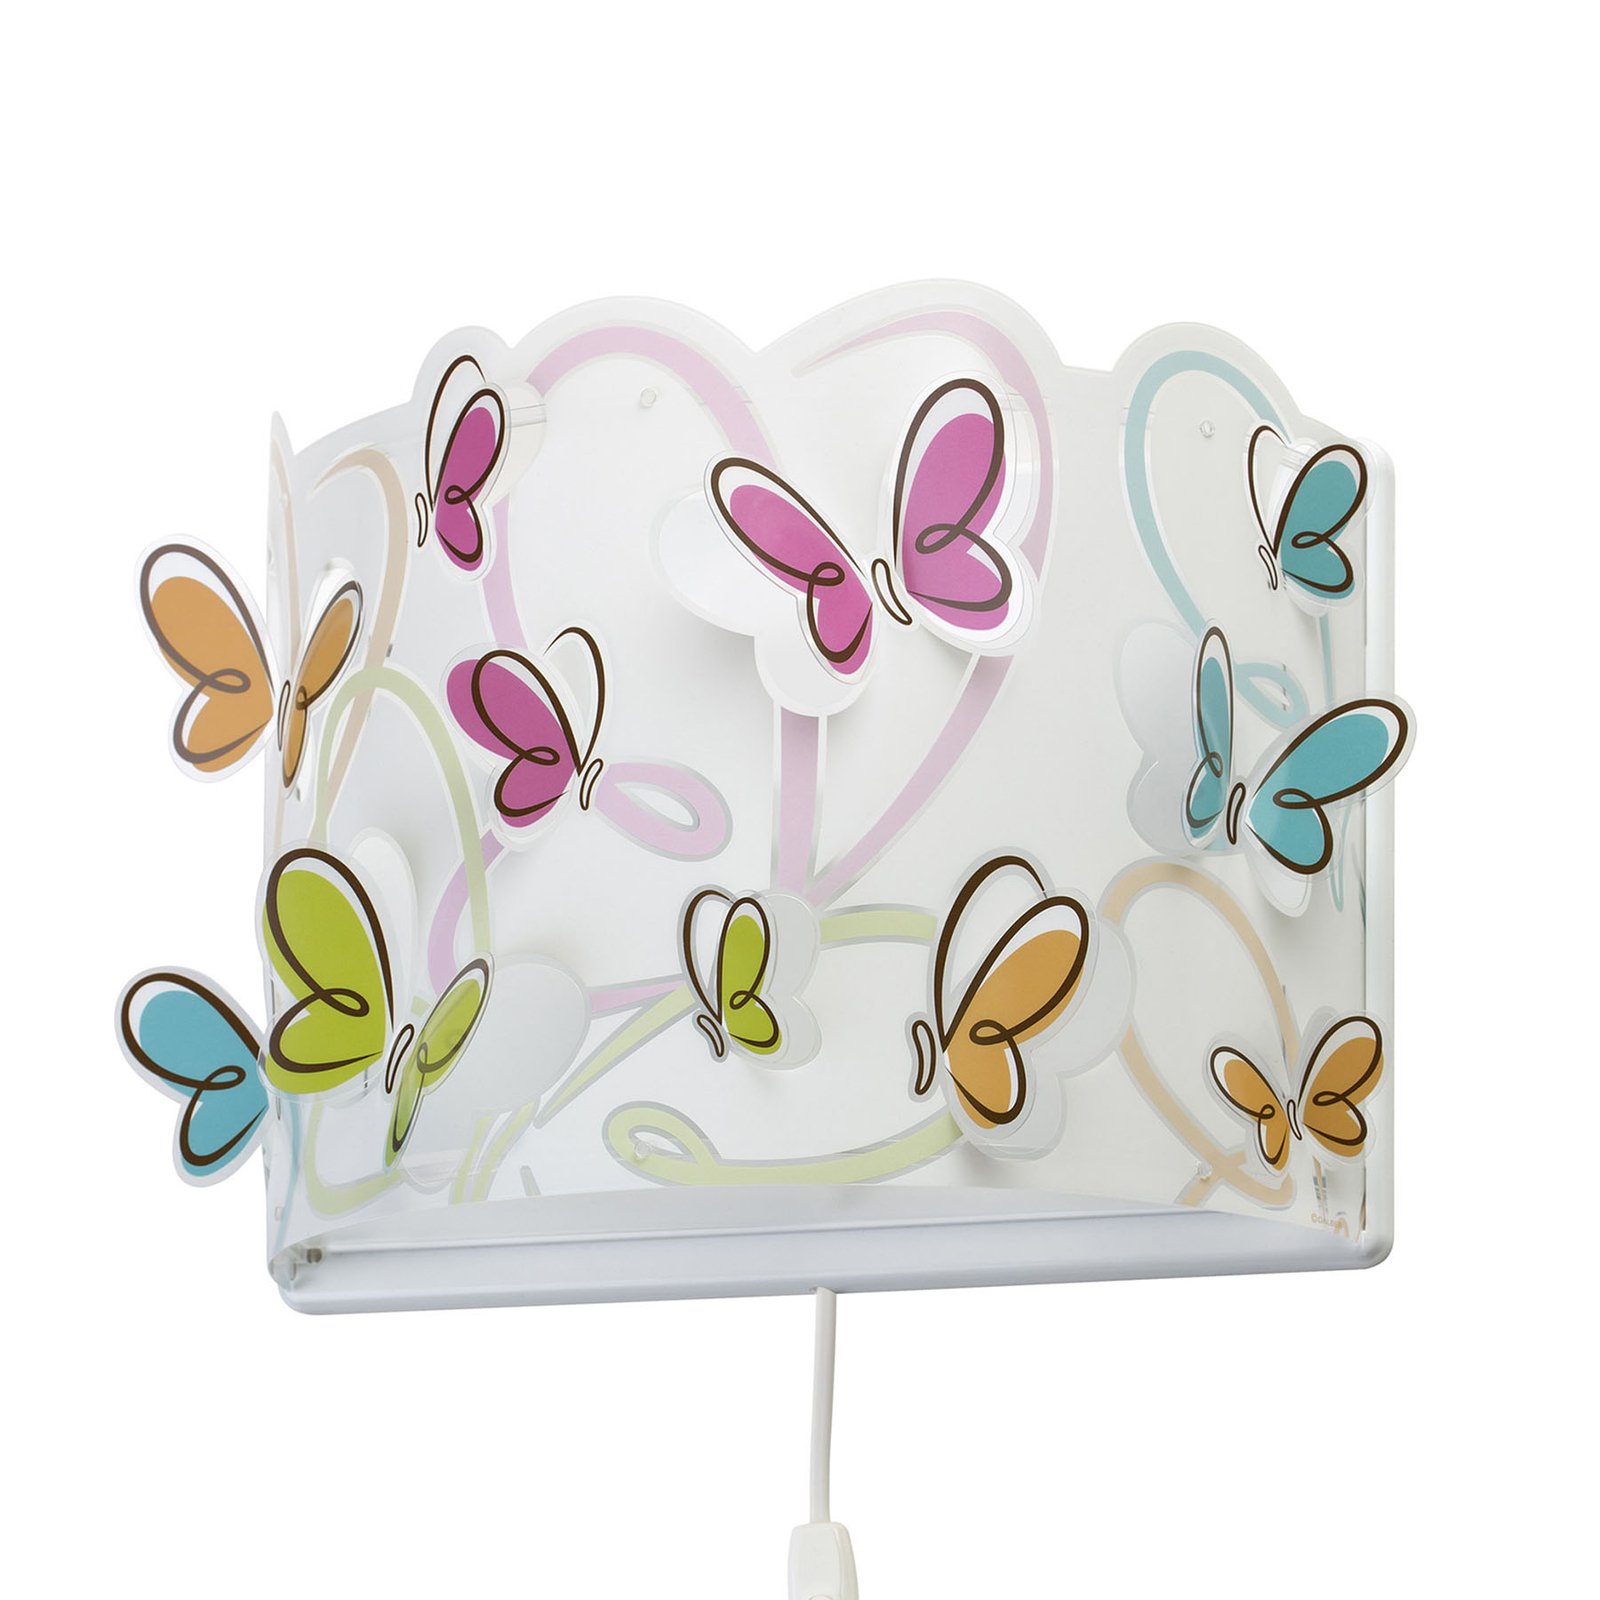 Butterfly children’s wall light, cable and plug